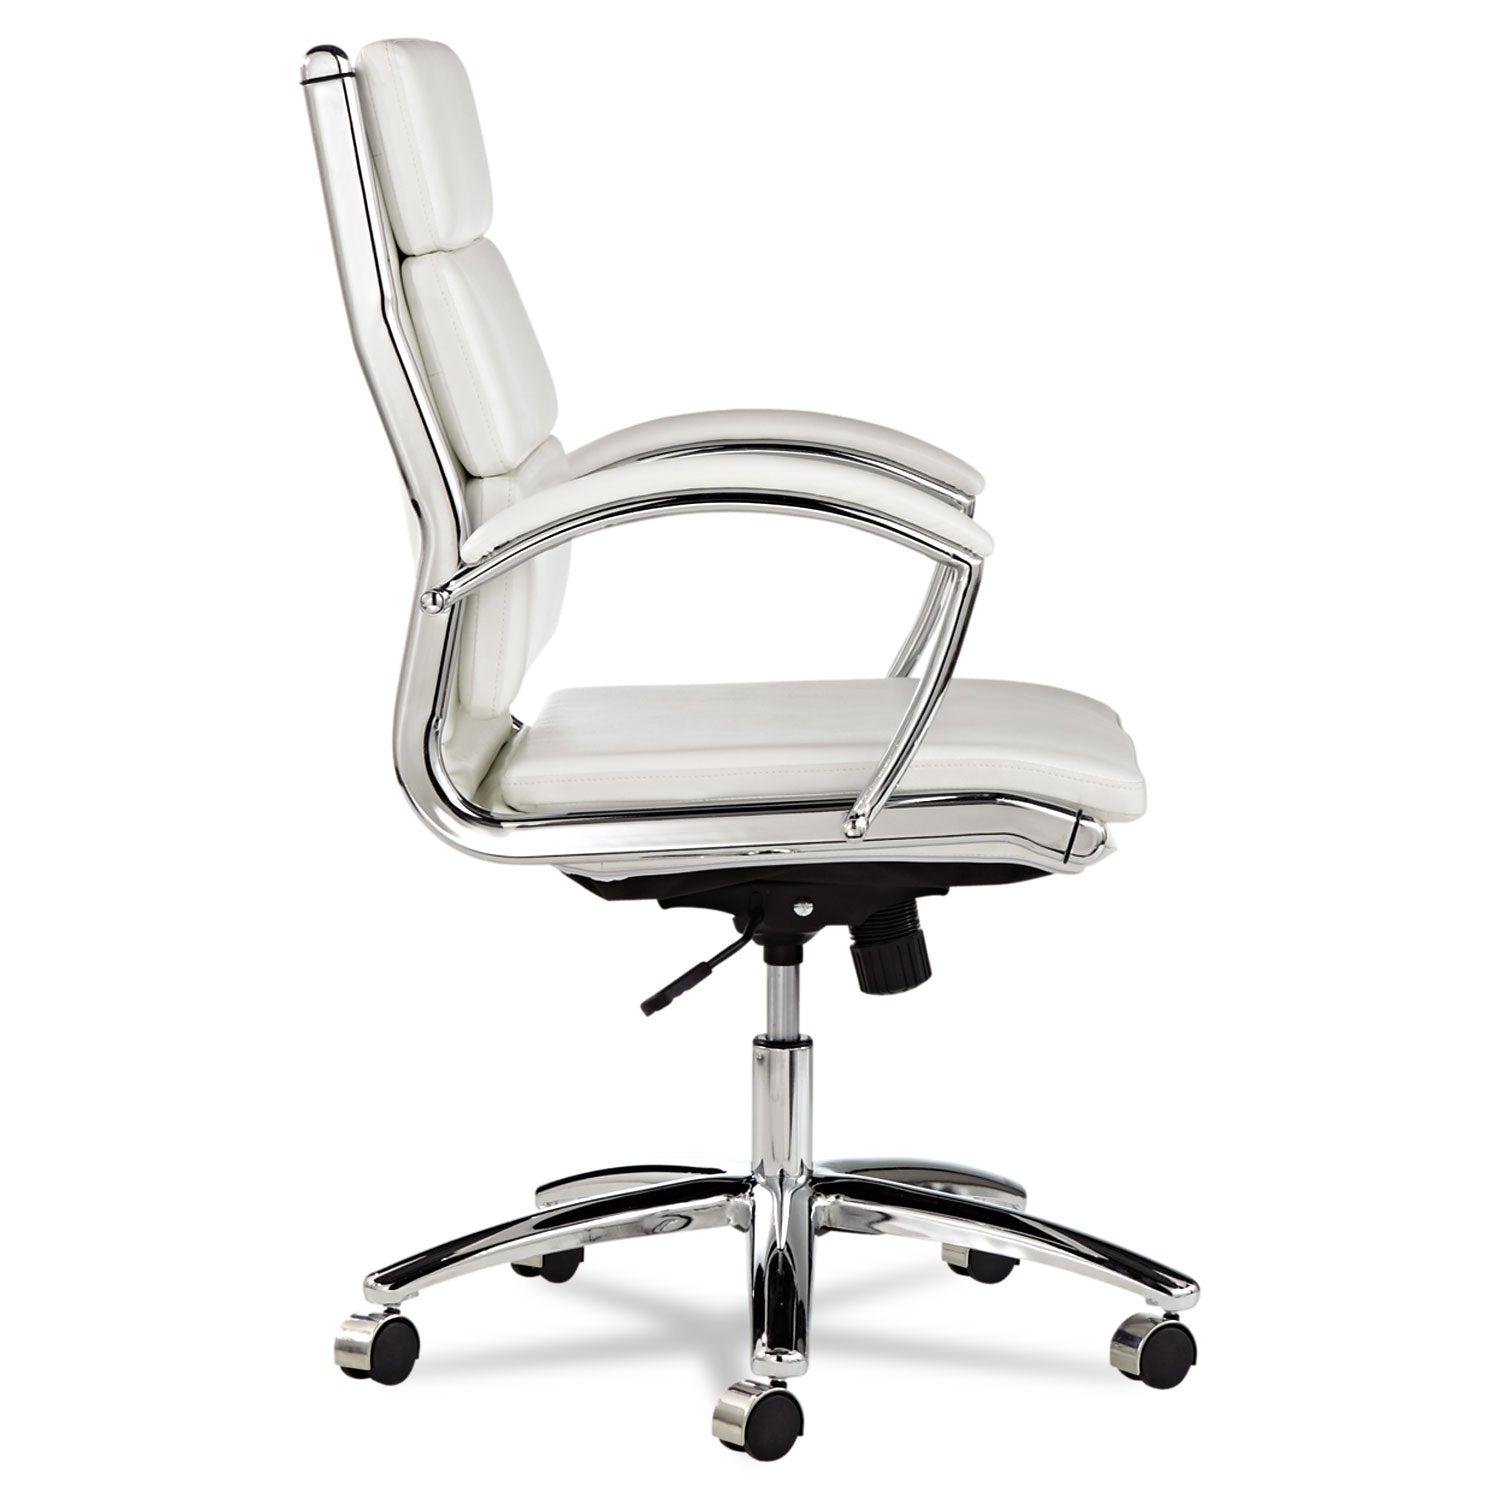 Alera Neratoli Mid-Back Slim Profile Chair, Faux Leather, Up to 275 lb, 18.3" to 21.85" Seat Height, White Seat/Back, Chrome - 